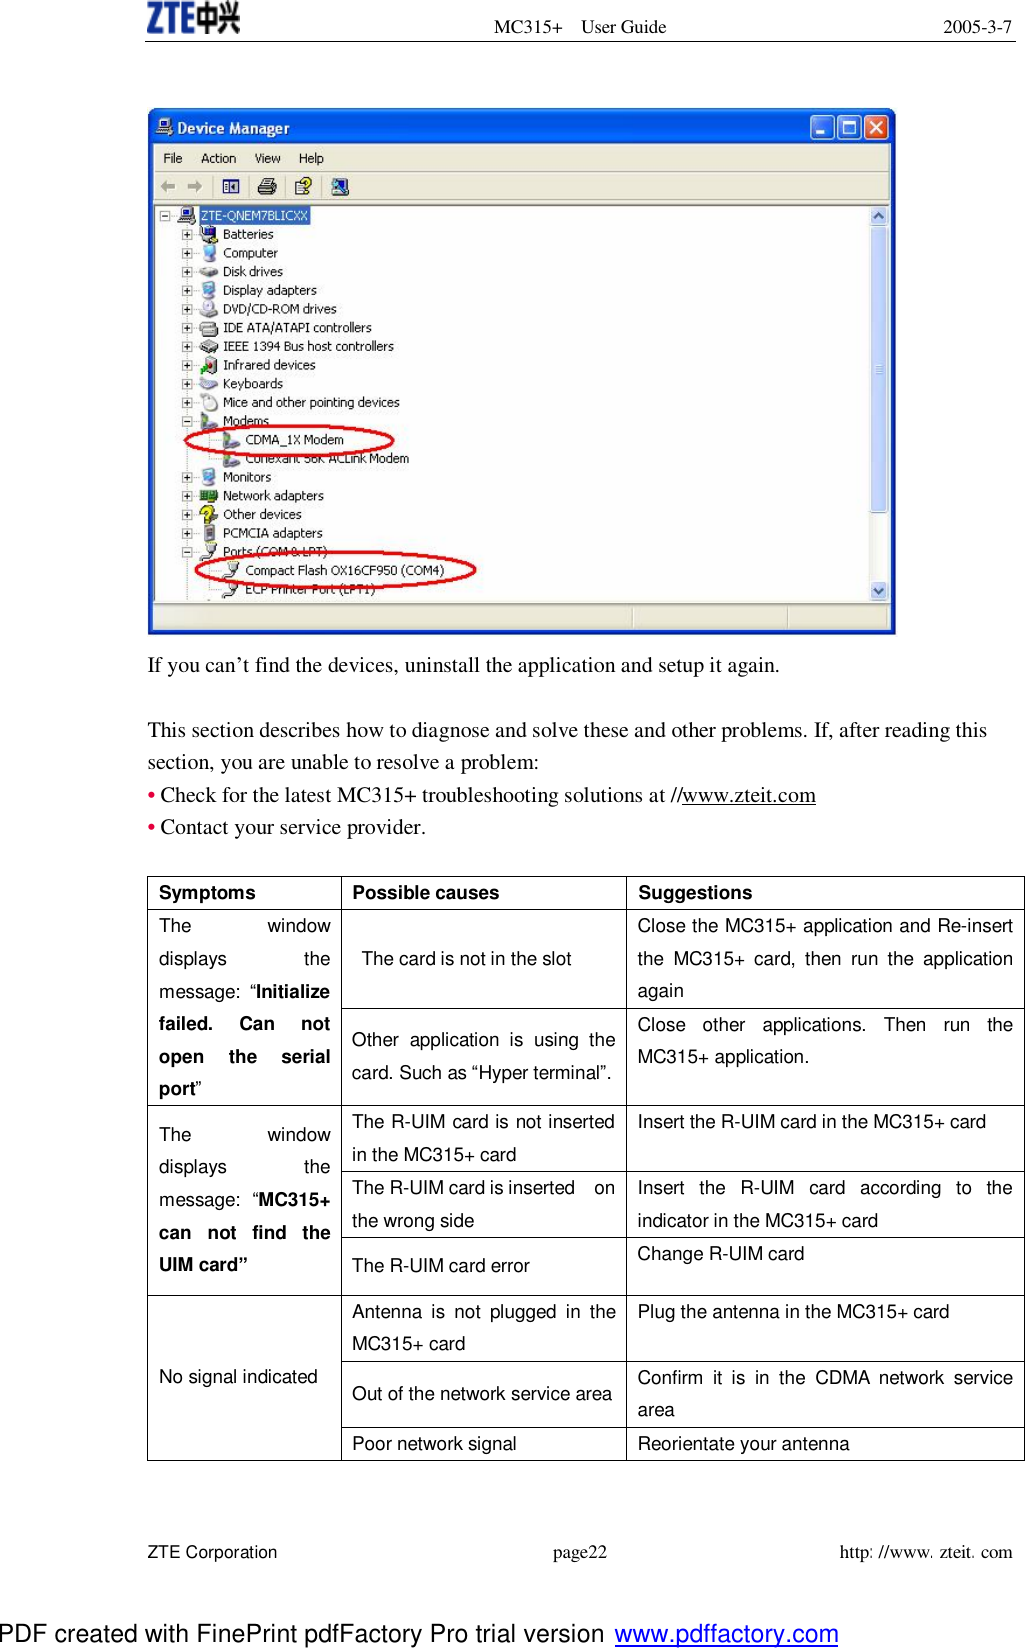  MC315+ User Guide 2005-3-7  ZTE Corporation page22 http://www.zteit.com   If you can’t find the devices, uninstall the application and setup it again.  This section describes how to diagnose and solve these and other problems. If, after reading this section, you are unable to resolve a problem: • Check for the latest MC315+ troubleshooting solutions at //www.zteit.com • Contact your service provider.  Symptoms Possible causes Suggestions  The card is not in the slot Close the MC315+ application and Re-insert the MC315+ card, then run the application again The window displays the message:  “Initialize failed. Can not open the serial port” Other application is using the card. Such as “Hyper terminal”. Close other applications. Then run the MC315+ application. The R-UIM card is not inserted in the MC315+ card Insert the R-UIM card in the MC315+ card The R-UIM card is inserted  on the wrong side Insert the R-UIM card according to the indicator in the MC315+ card The window displays the message:  “MC315+ can not find the UIM card” The R-UIM card error  Change R-UIM card  Antenna is not plugged in the MC315+ card Plug the antenna in the MC315+ card Out of the network service area Confirm it is in the CDMA network service area  No signal indicated Poor network signal Reorientate your antenna PDF created with FinePrint pdfFactory Pro trial version www.pdffactory.com